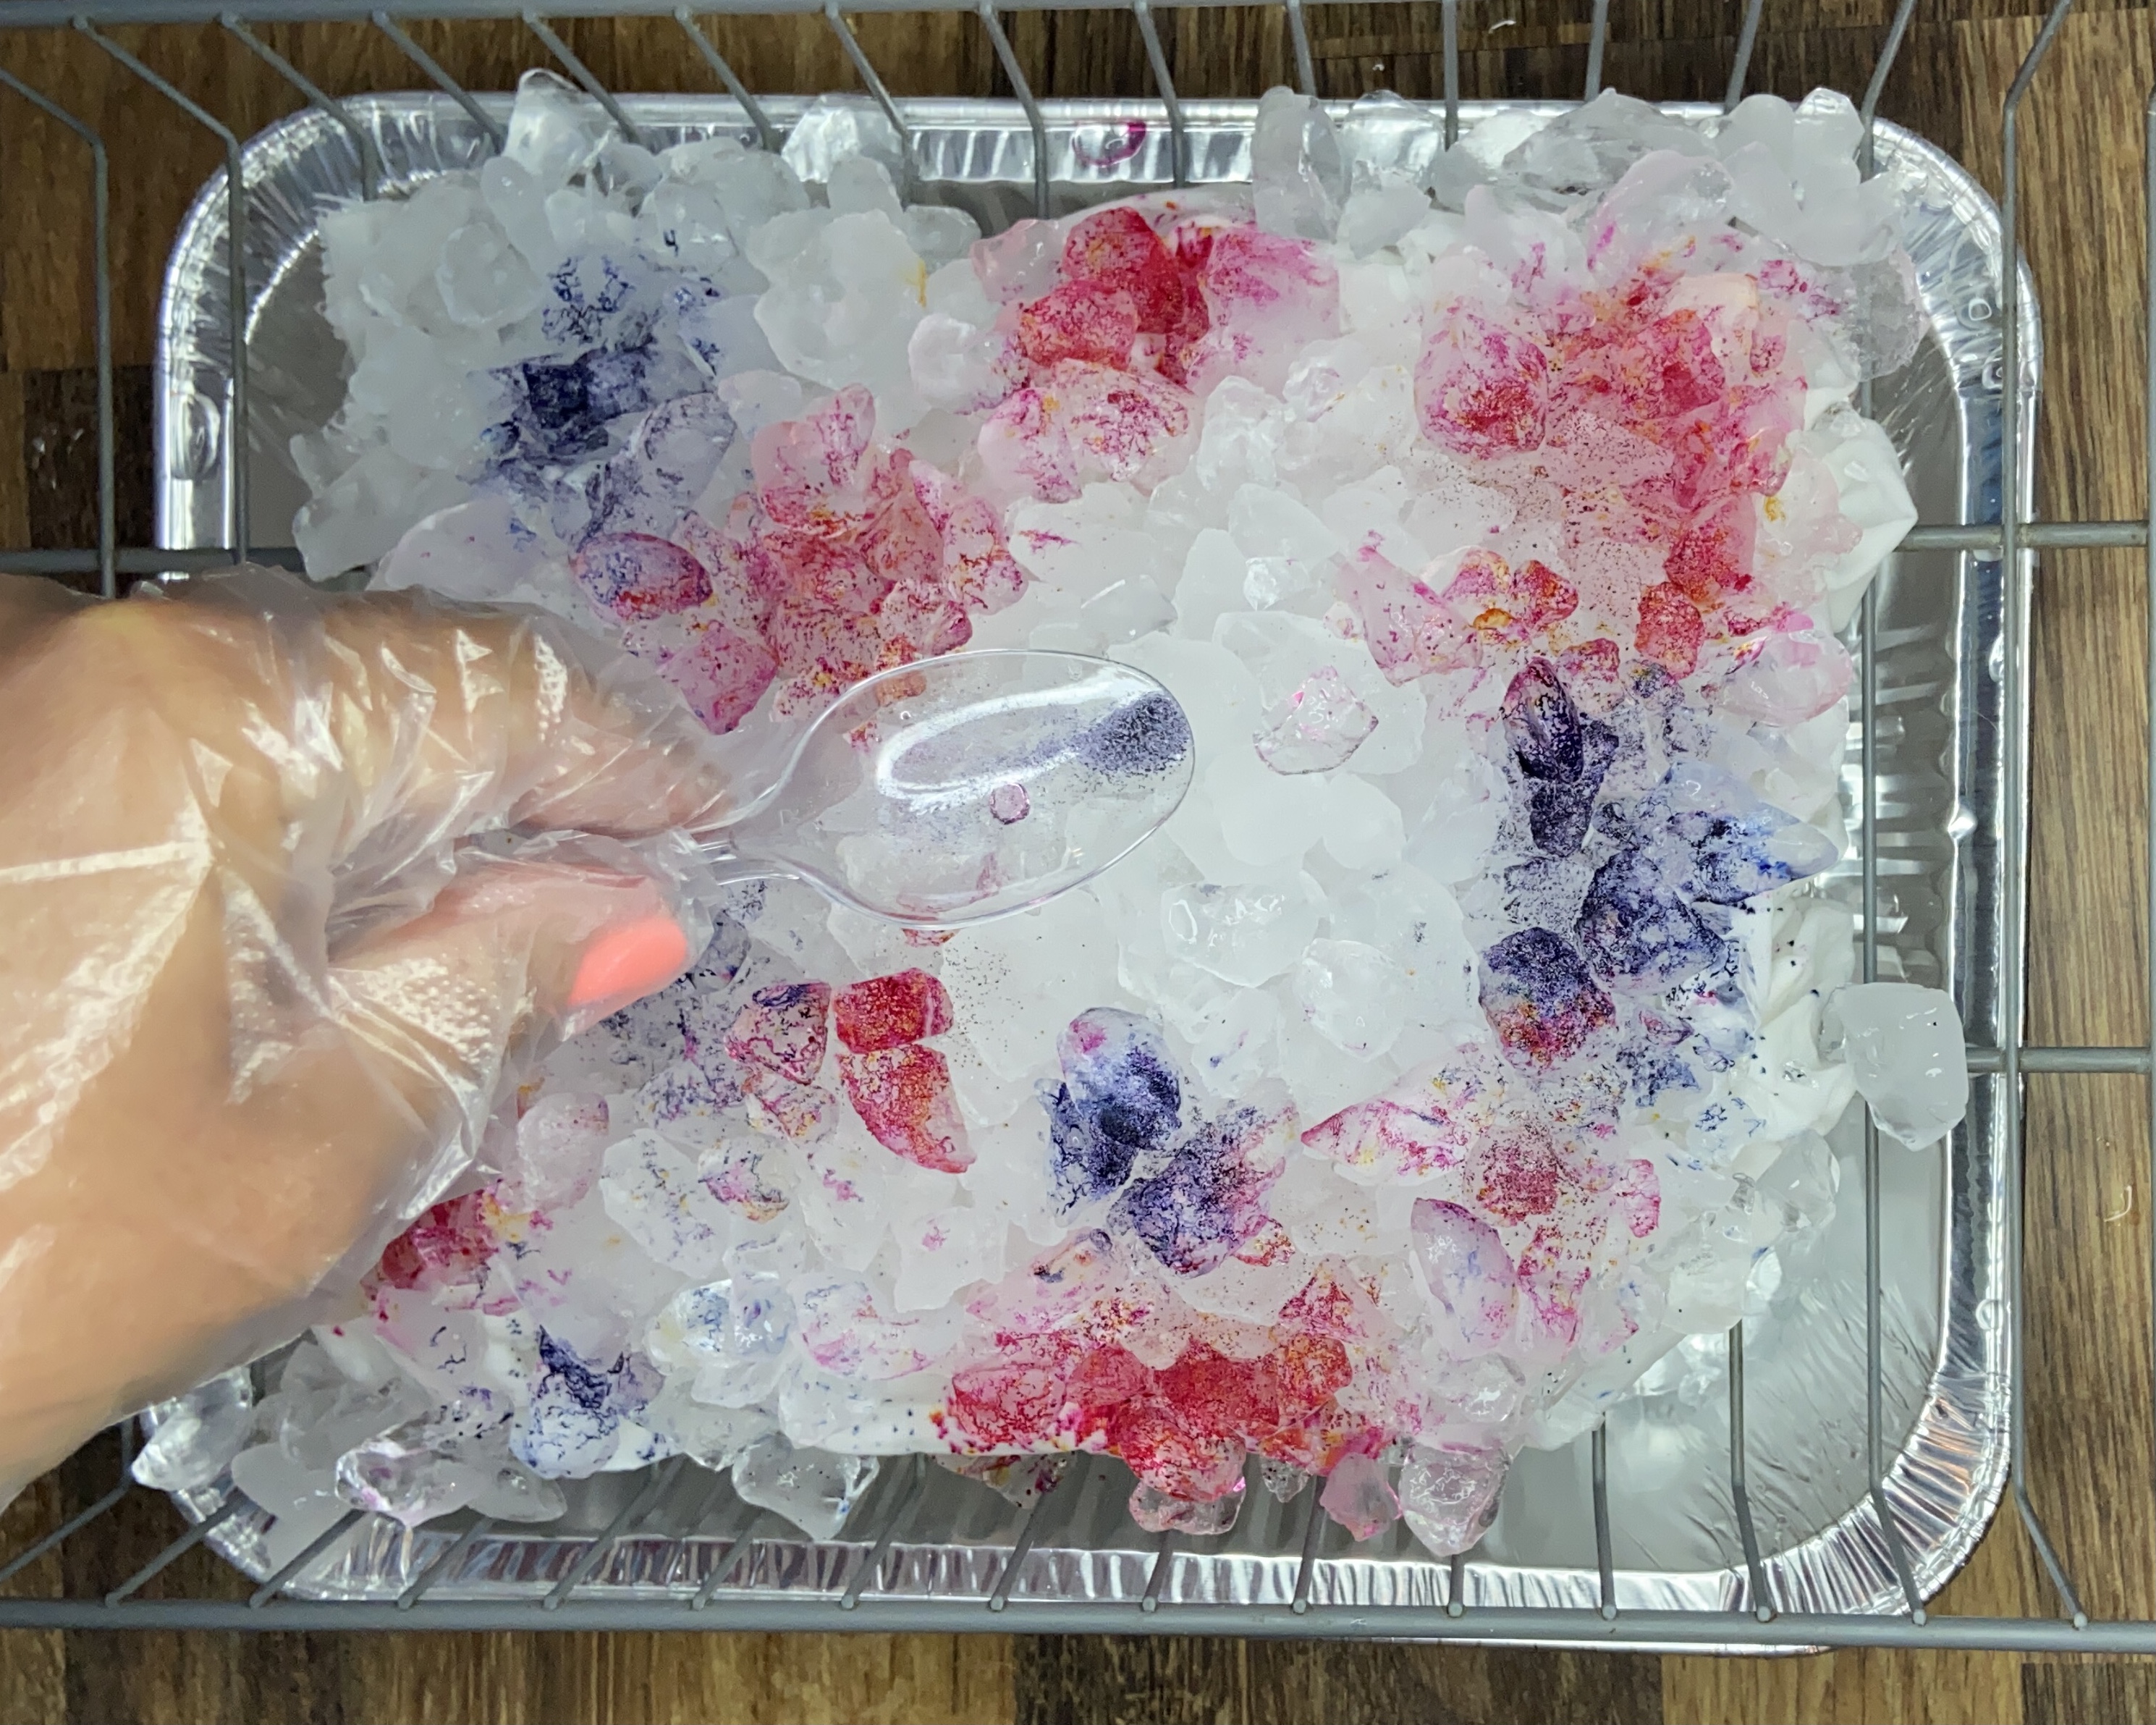 How to ice dye step 4